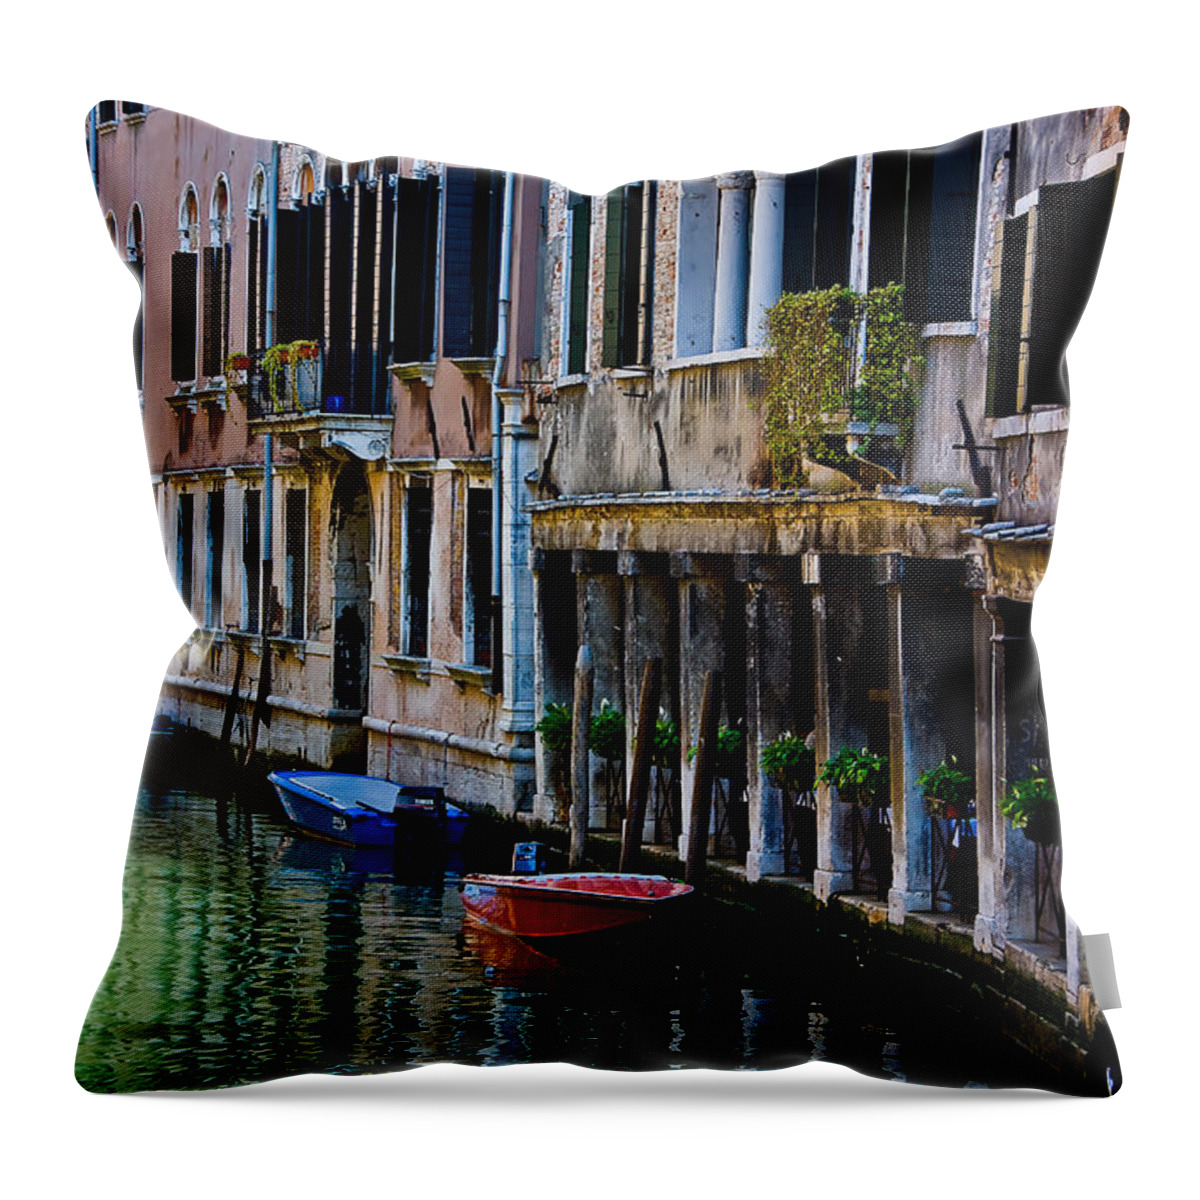  Canal Throw Pillow featuring the photograph Three Boats by Harry Spitz